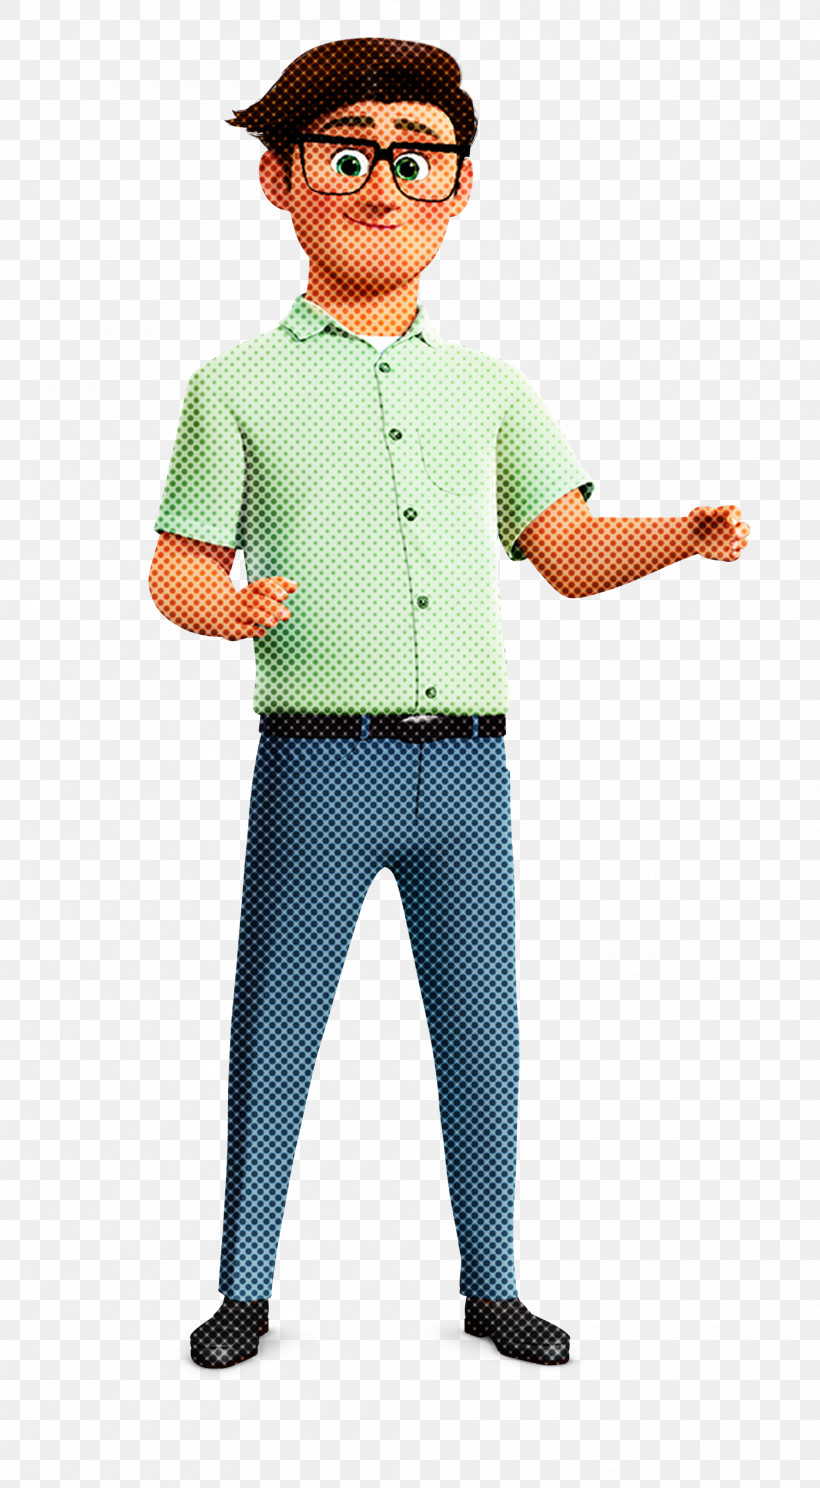 Cartoon Standing Male Animation Costume, PNG, 2000x3630px, Cartoon, Animation, Costume, Gentleman, Male Download Free